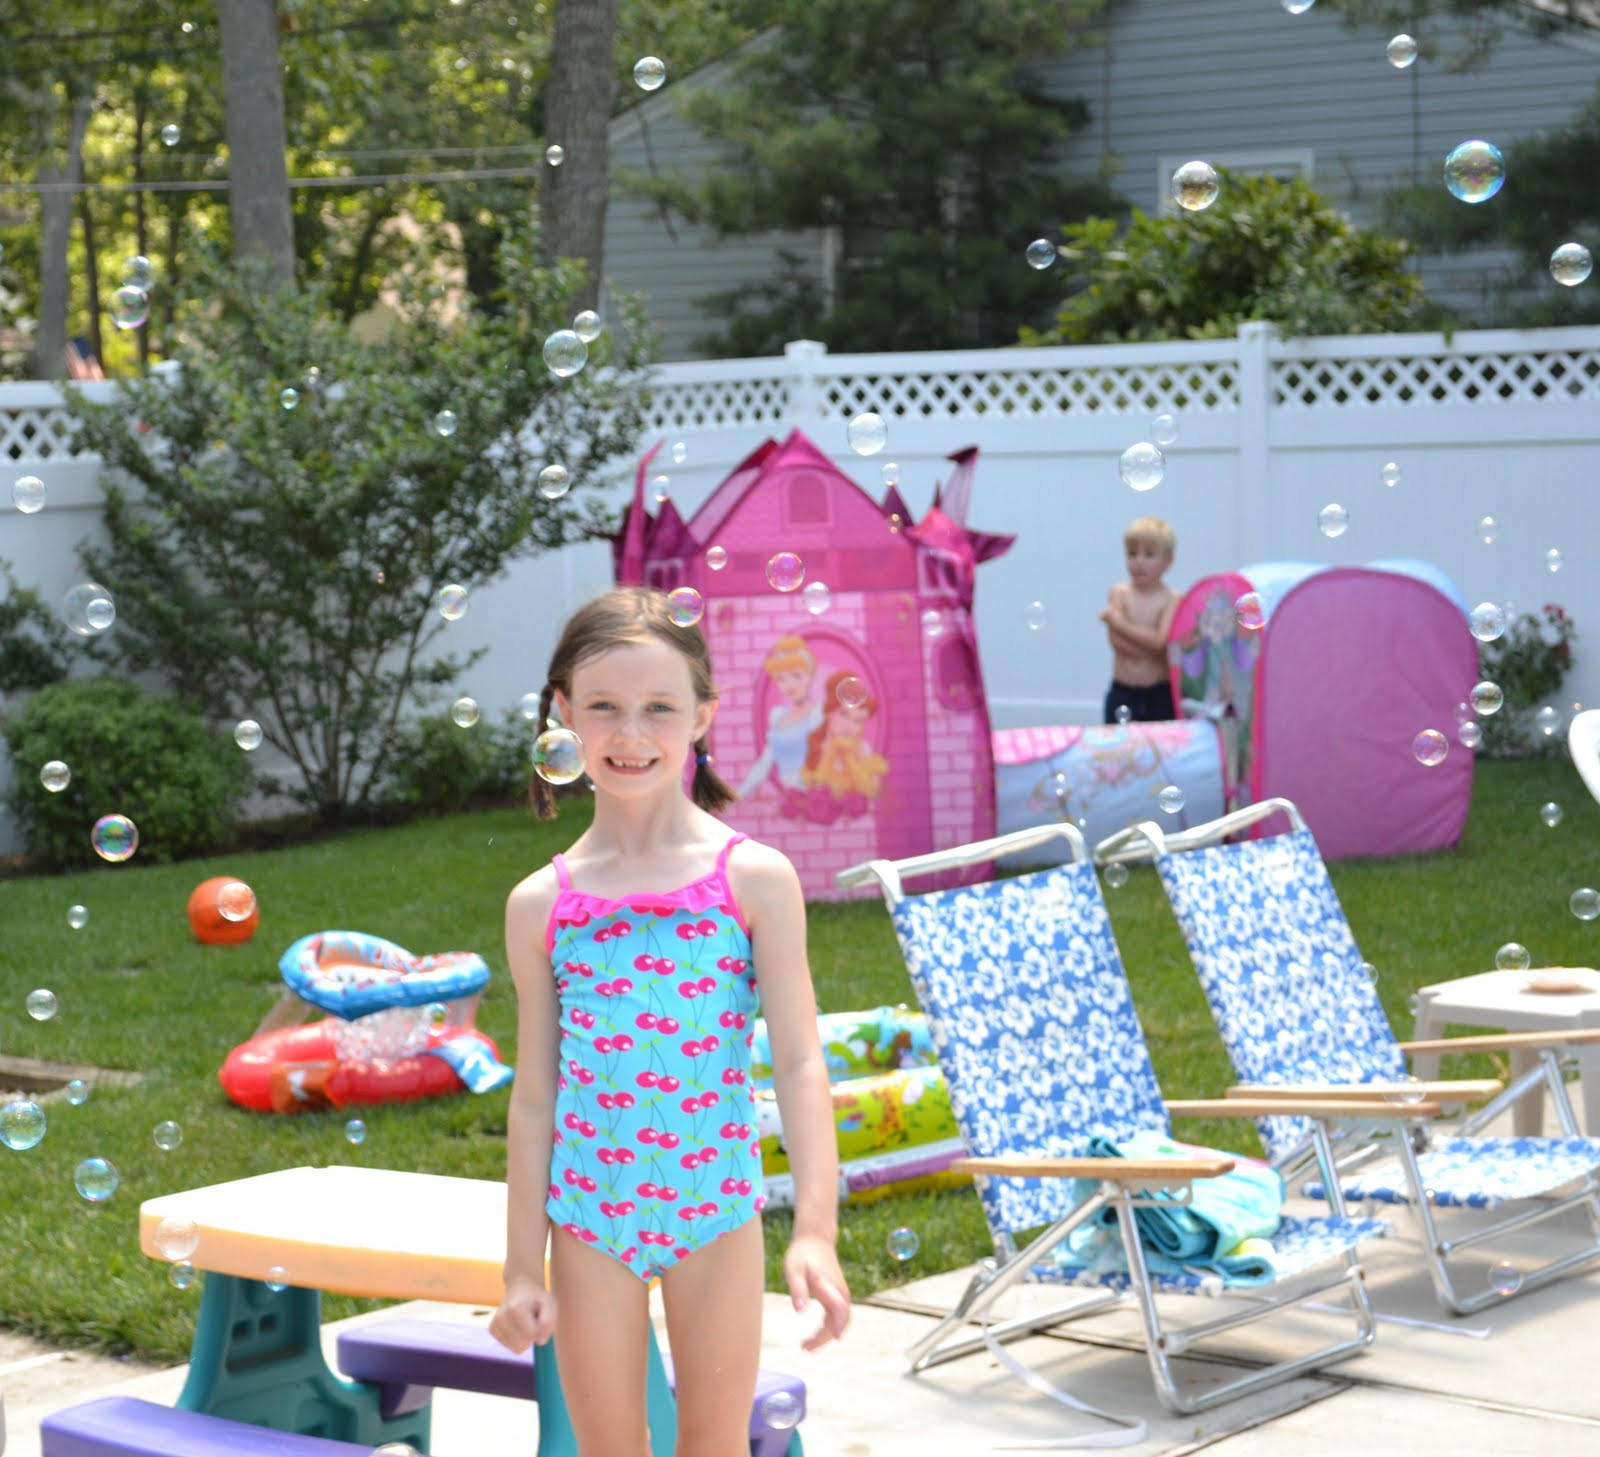 Girl Pool Party Ideas
 Jersey Shore Journal A Princess Party for a 3 year old